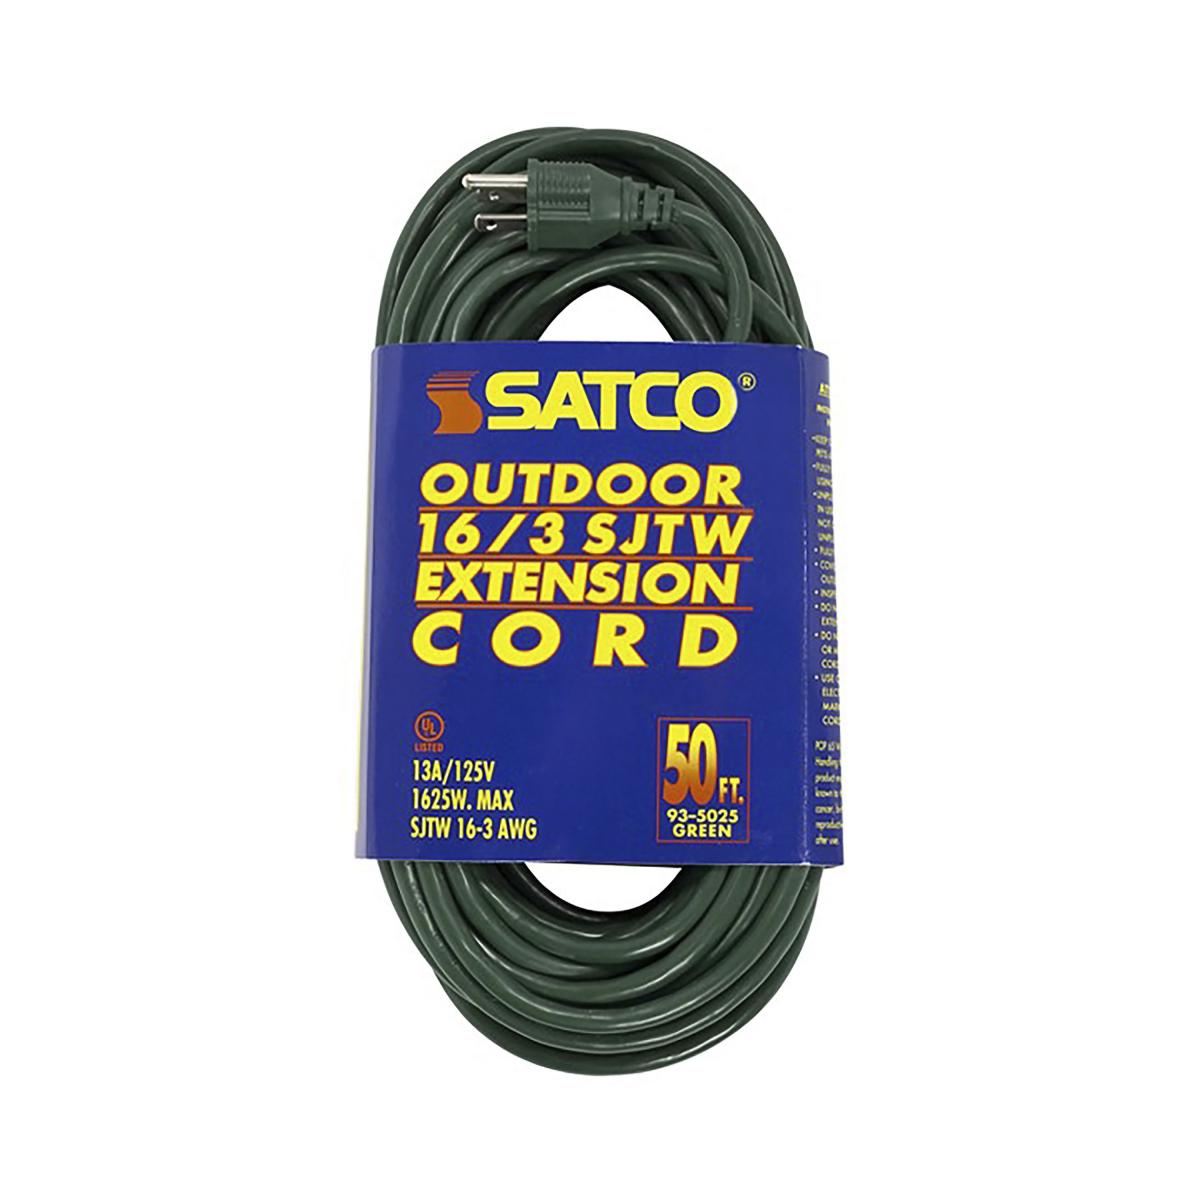 Satco 93-5025 50 Foot Green Heavy Duty Outdoor Extension Cord 16/3 Ga. SJTW-3 Green Cord With Sleeve 13A-125V 1625W